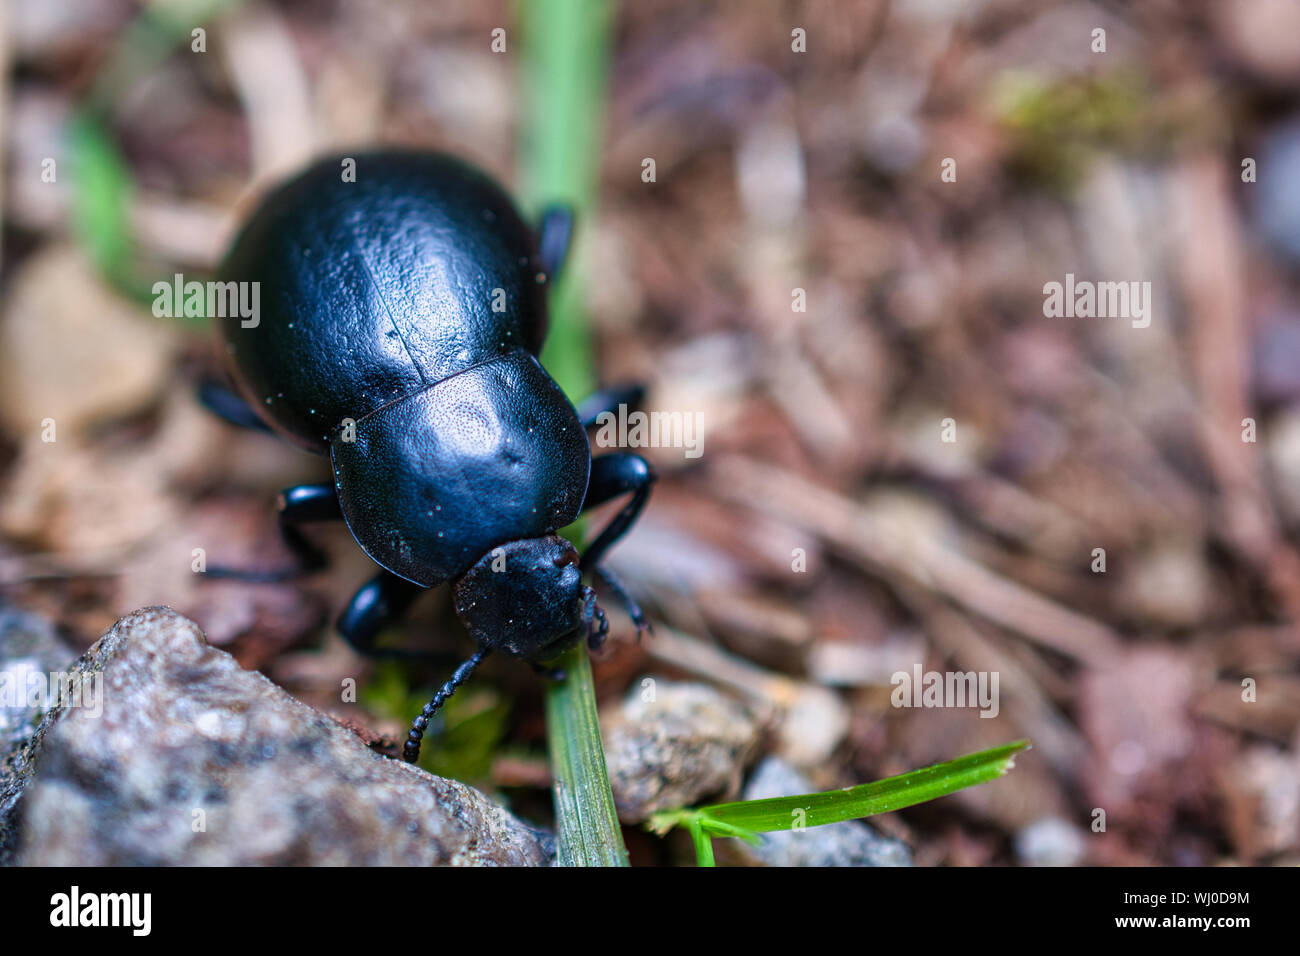 May beetle eating a grass, close-up bug photo Stock Photo